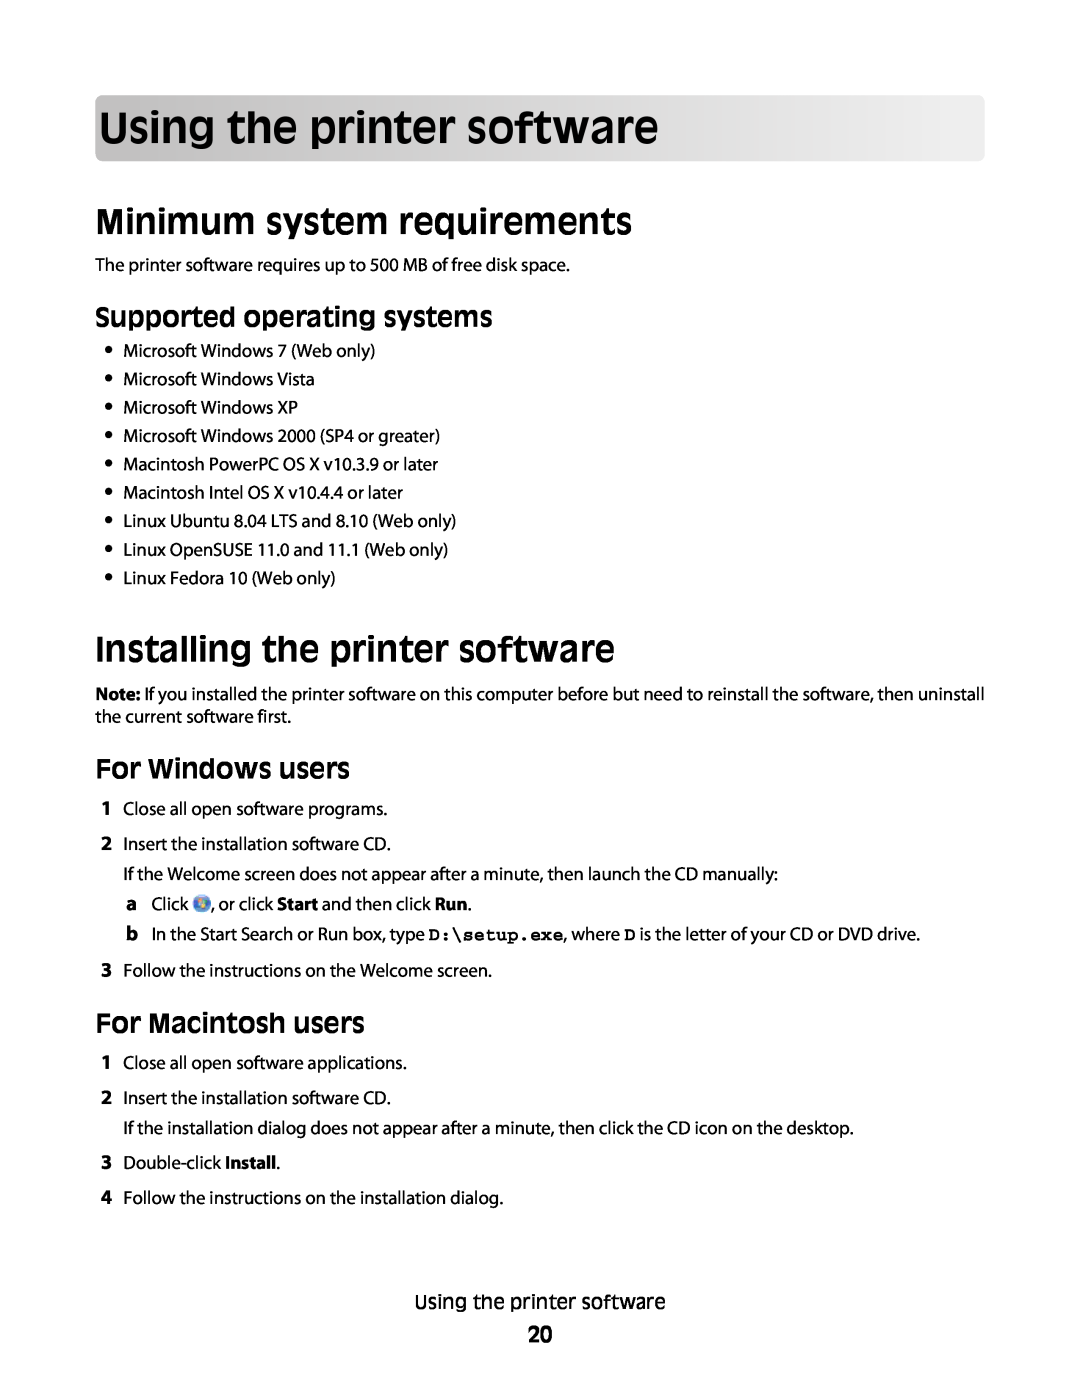 Lexmark S400 Usingtheprintersoftware, Minimum system requirements, Installing the printer software, For Windows users 